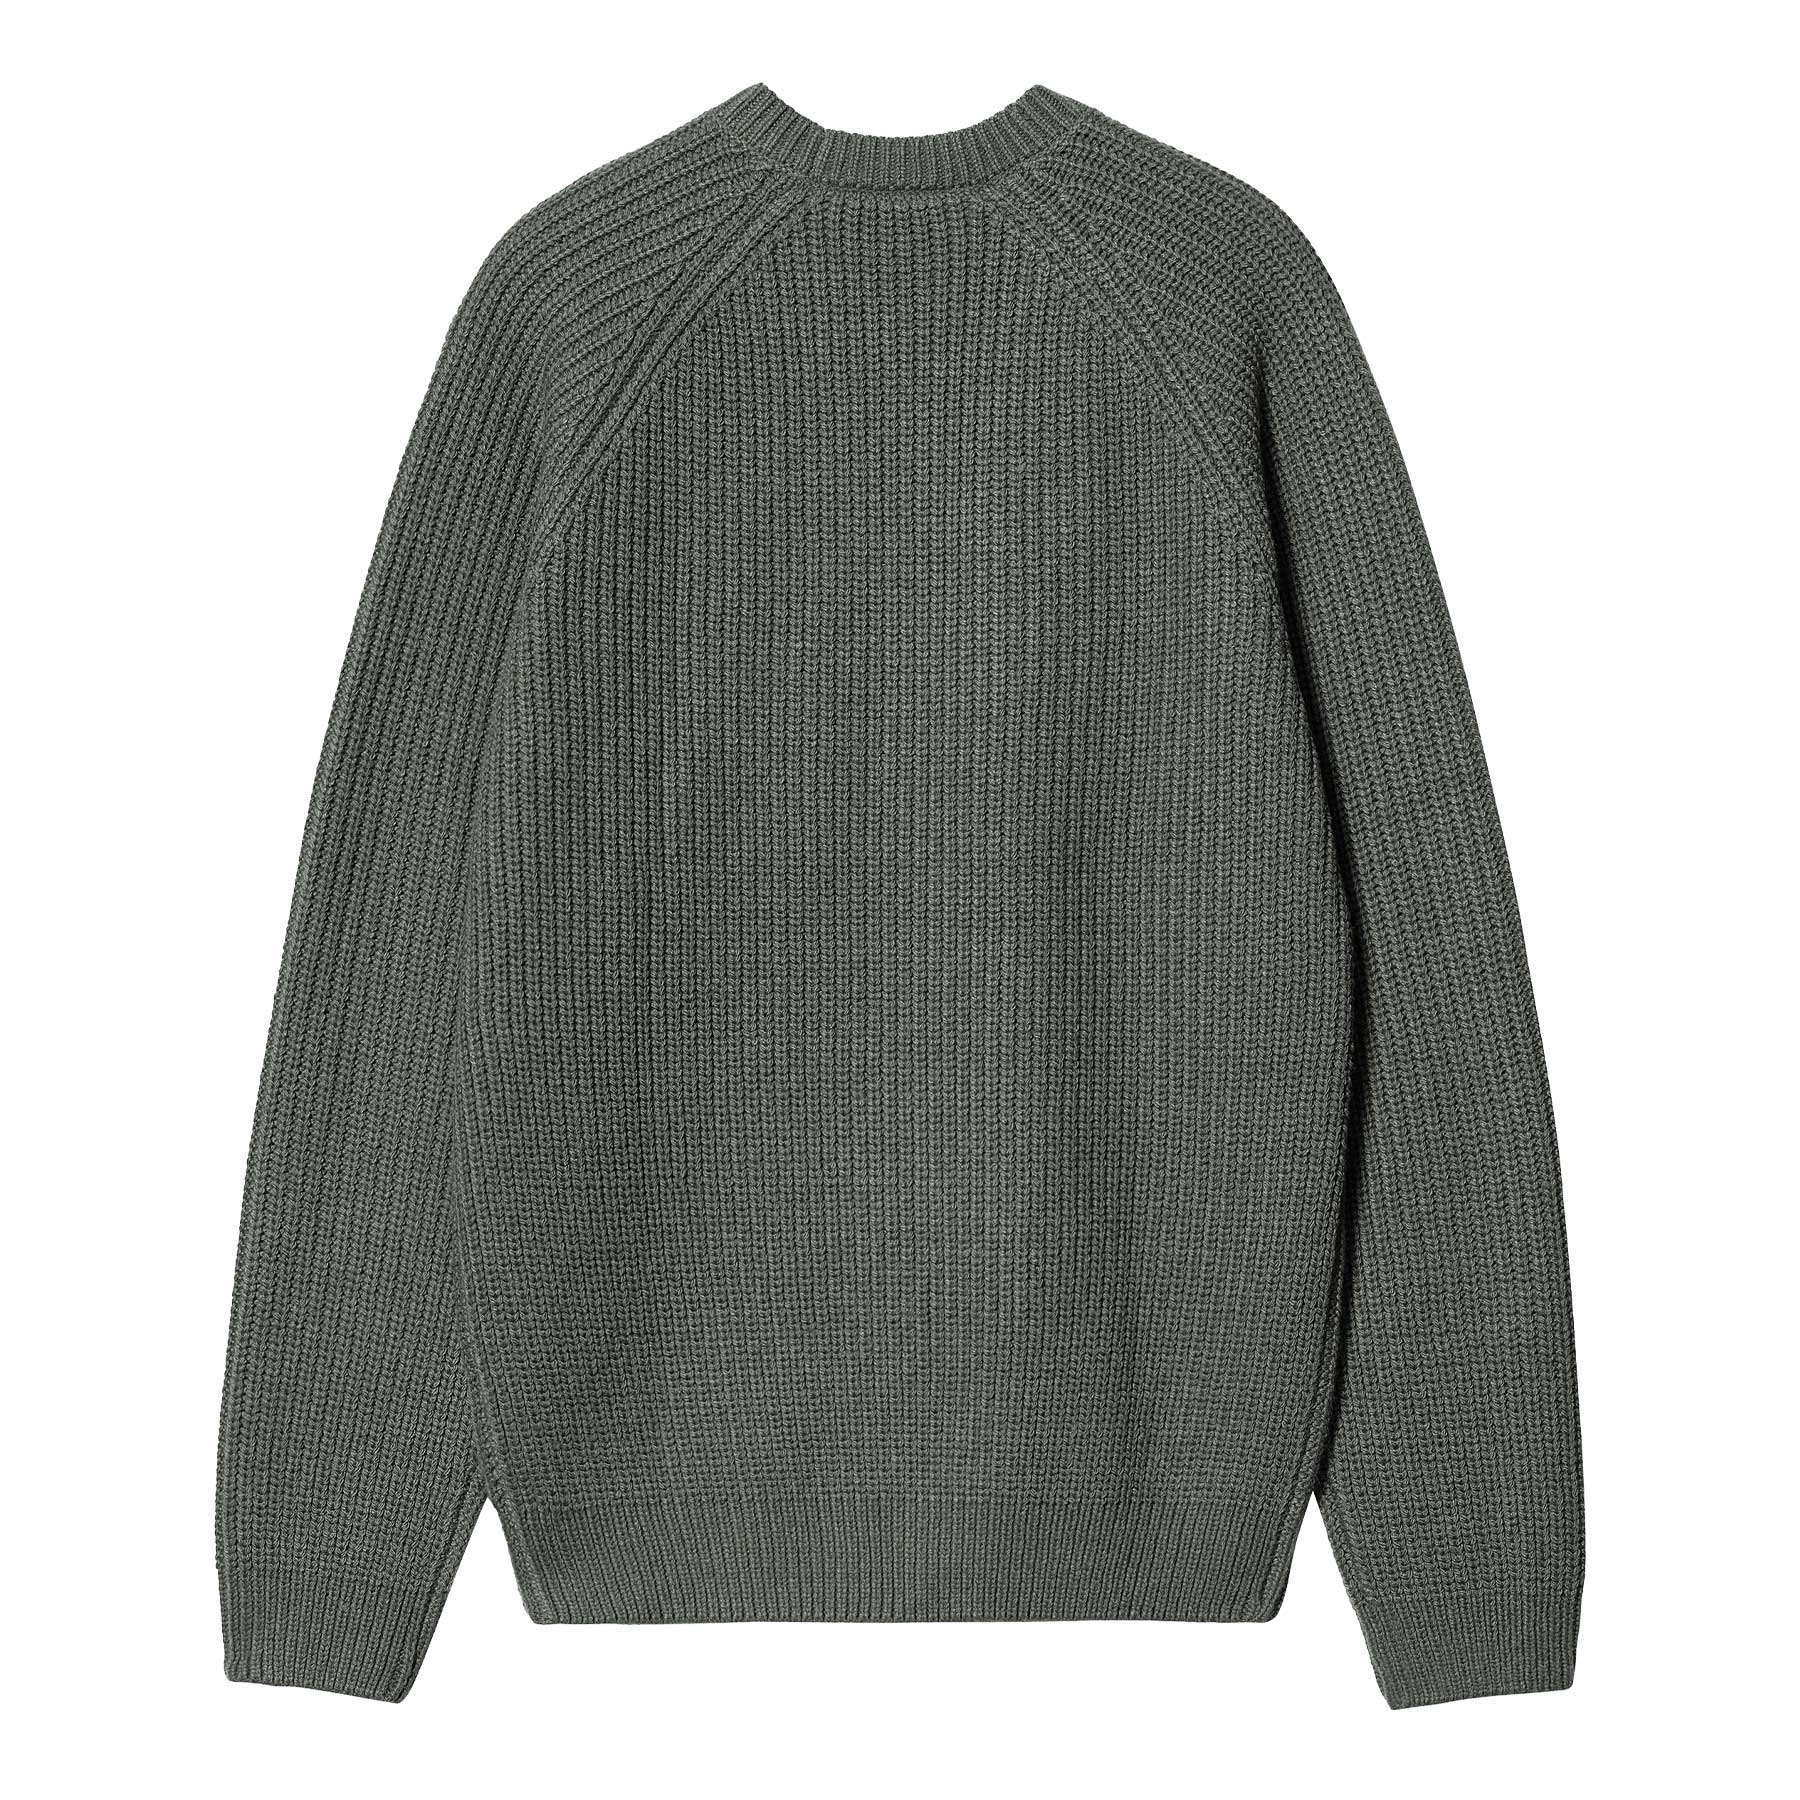 Carhartt Wip Maglione Forth | Special – Special Milano